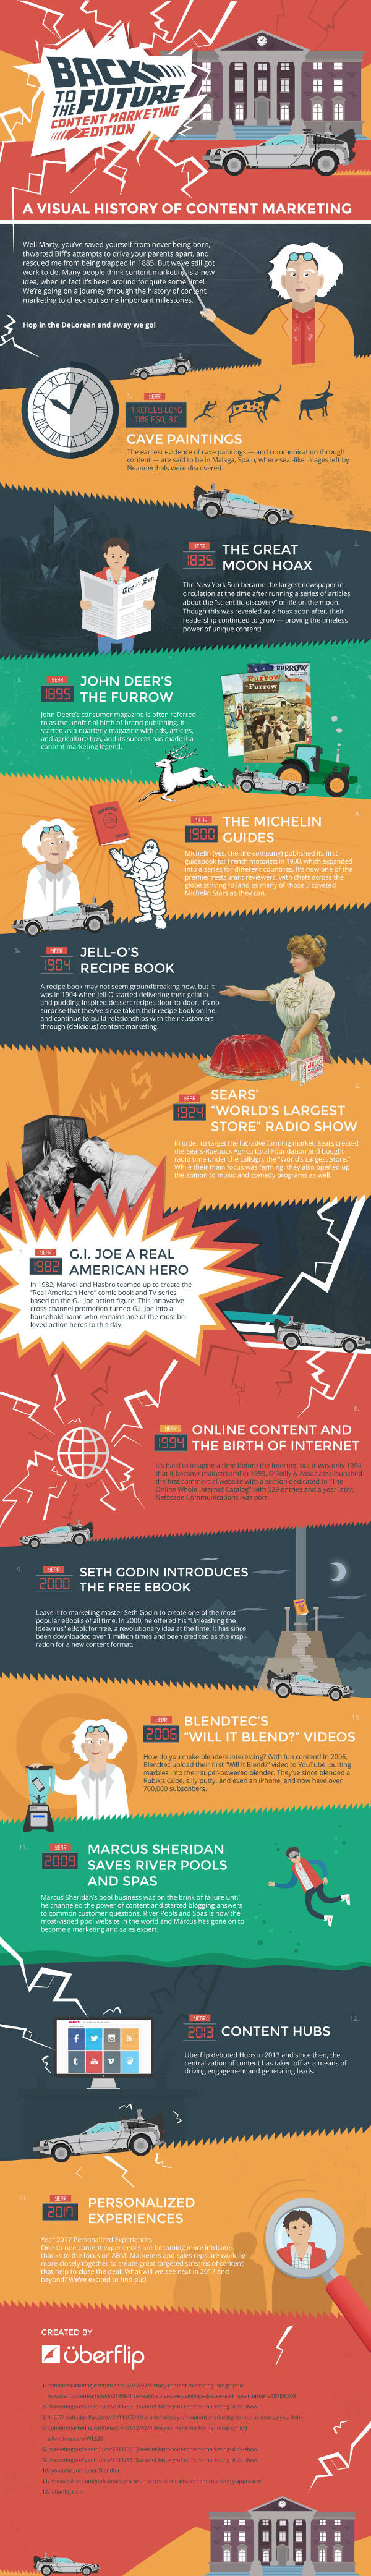 Infographic A Visual History of Content Marketing